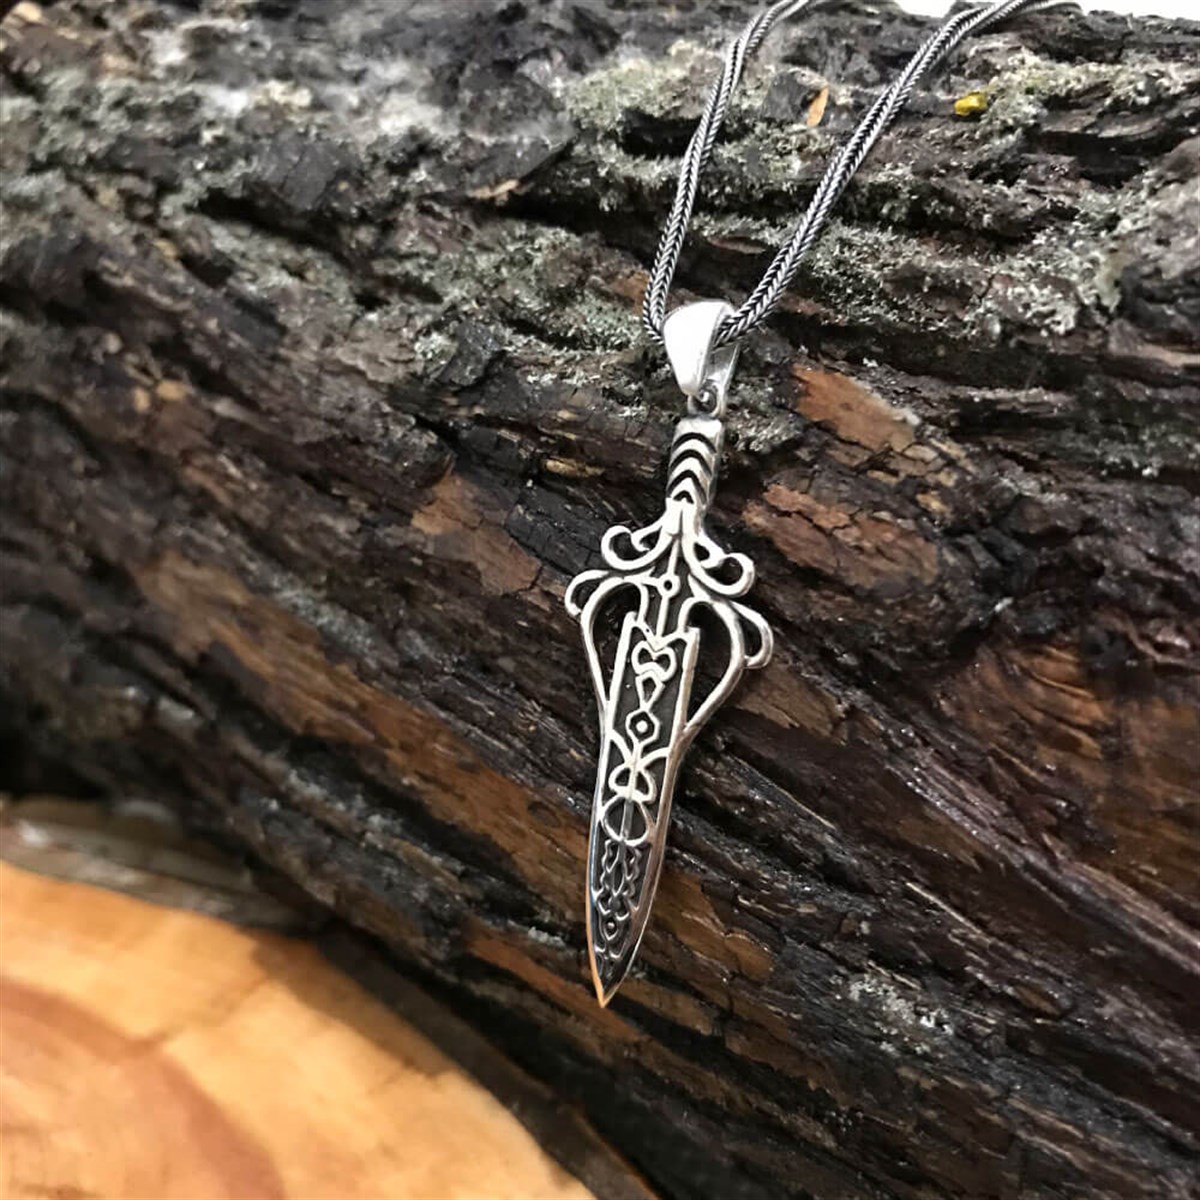 Embroidered Sword Sterling Silver Men's Necklace